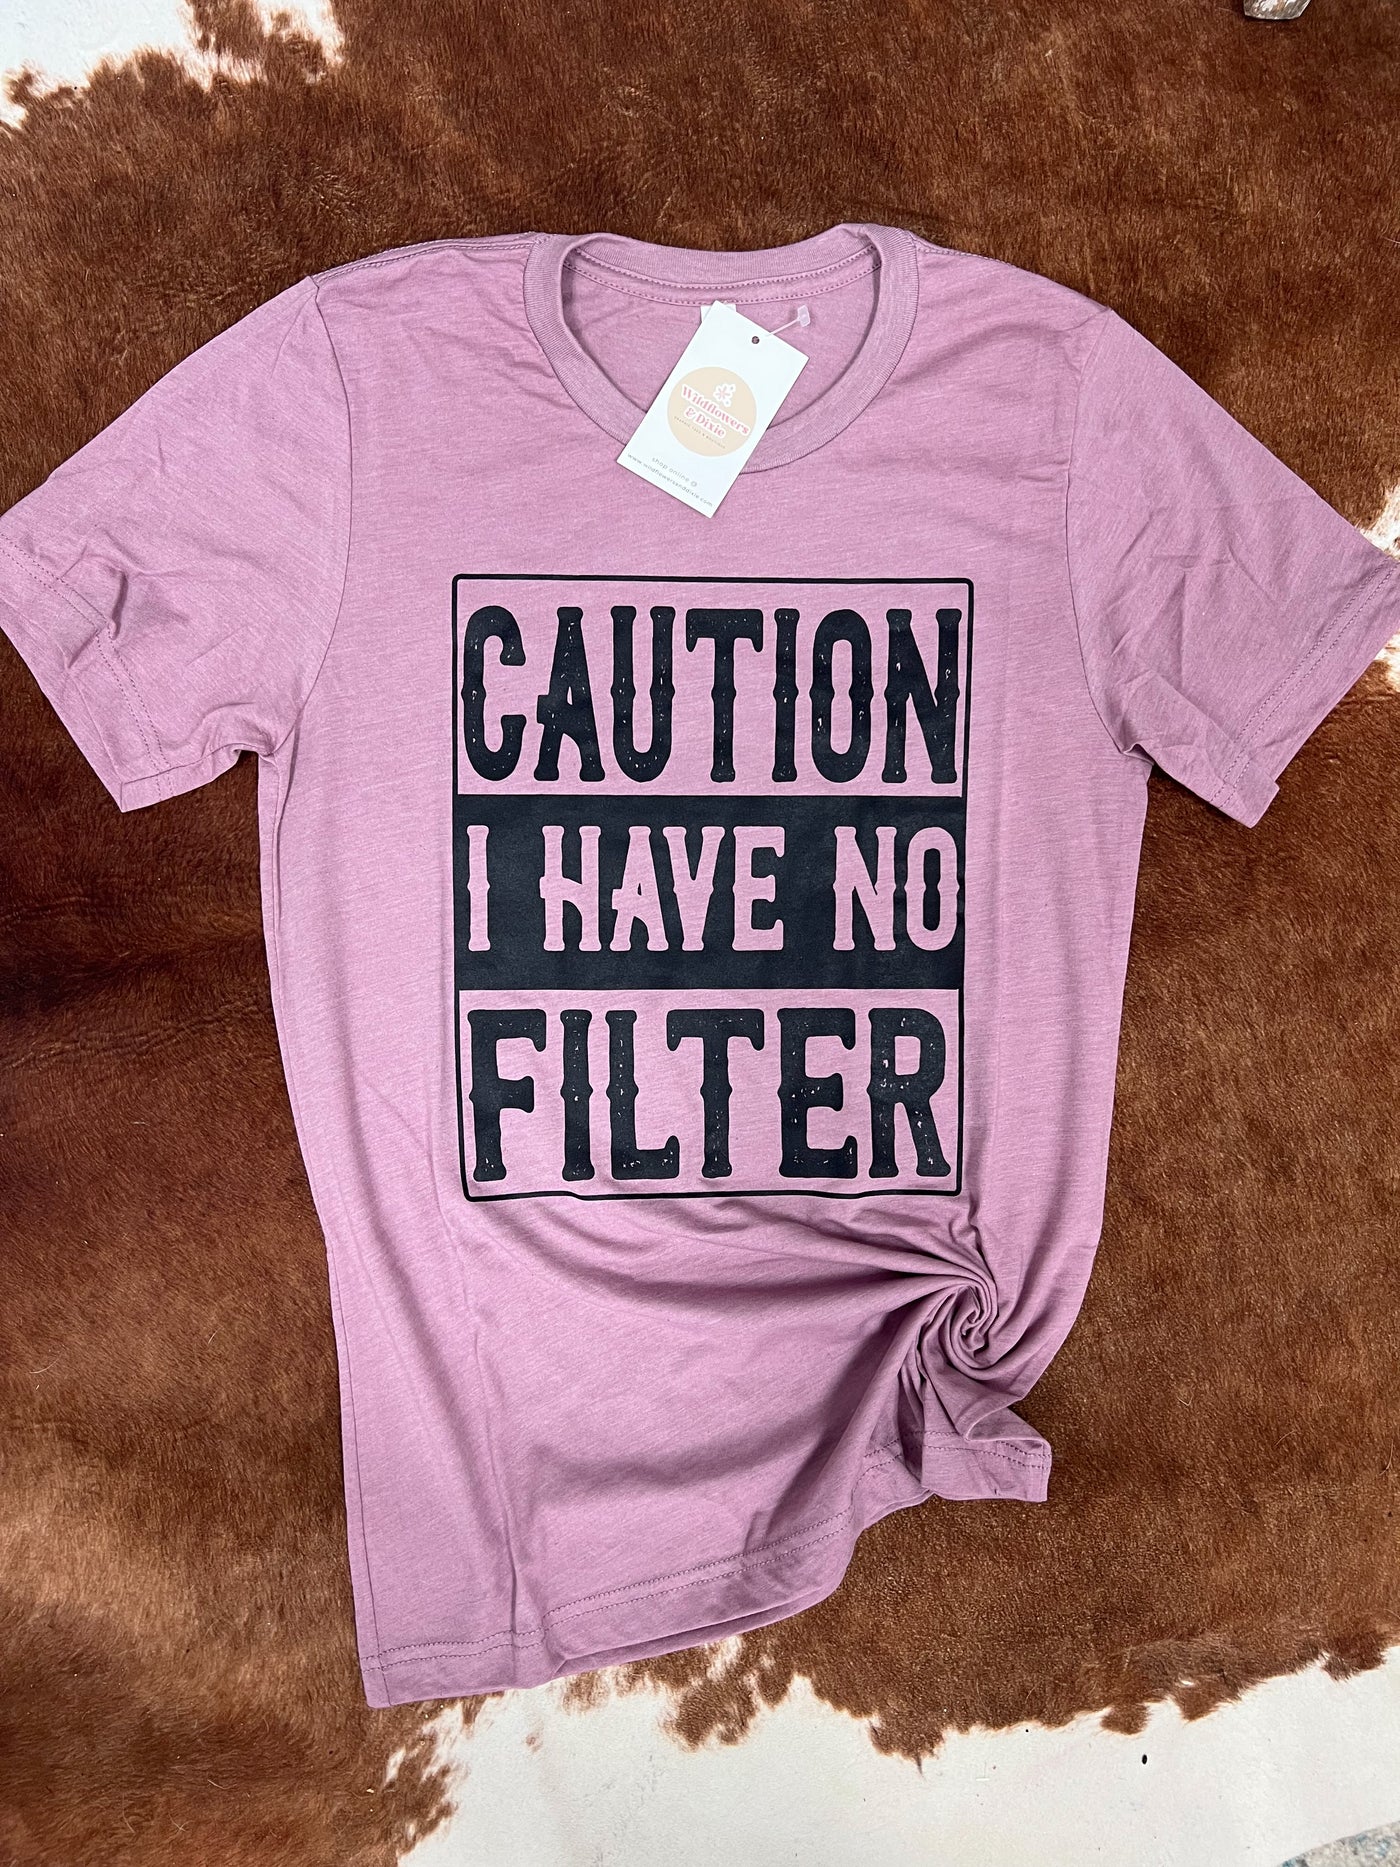 CLEARANCE "Caution: I Have No Filter" T-shirt